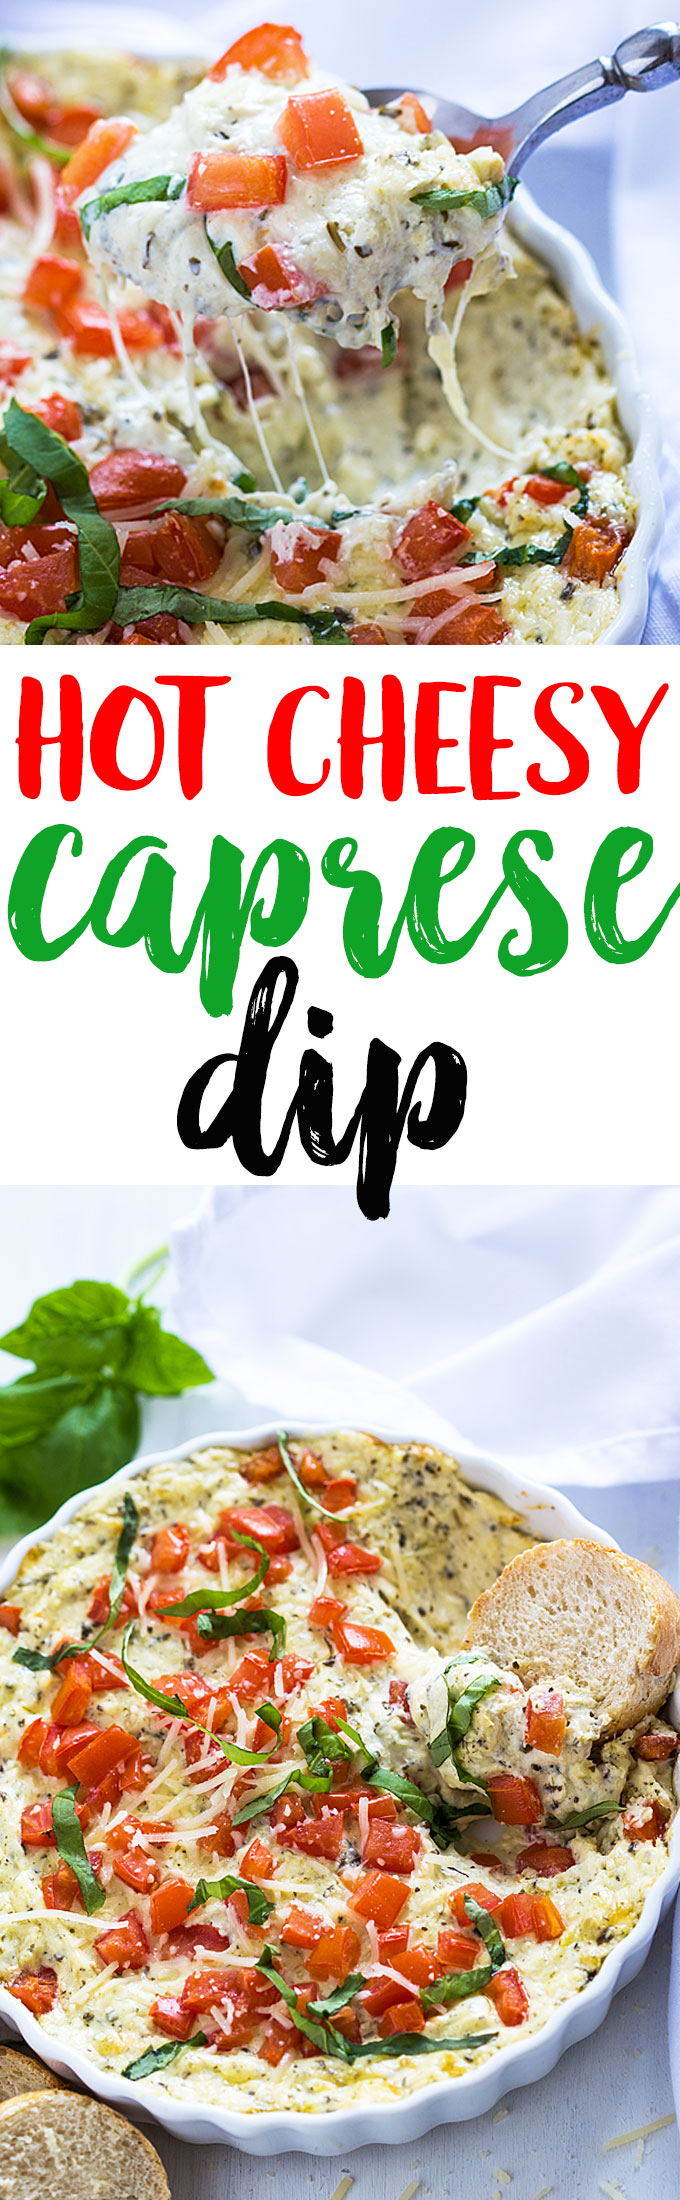 Two images of caprese dip - one with a spoon and one in a baking dish.  